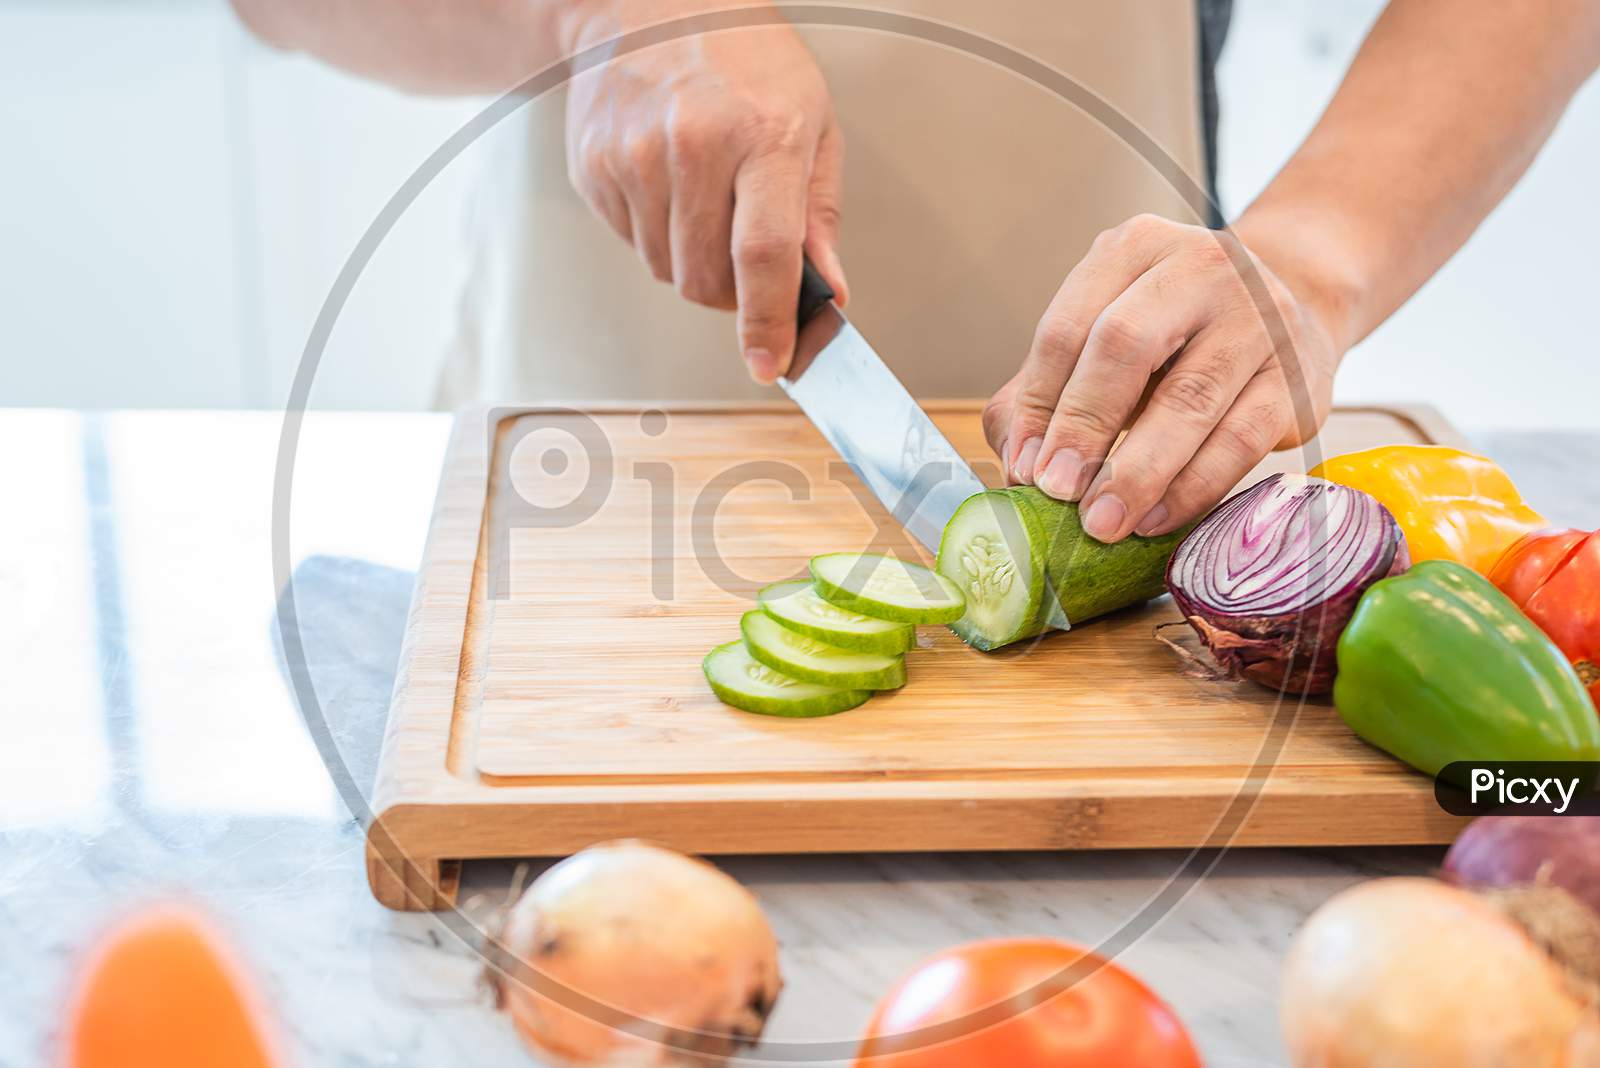 Close Up Of Man Hand Cooking And Slicing Vegetable In The Kitchen For Preparing Dinner With His Wife When Coming Home. People And Lifestyles Concept. Food And Drink Theme.